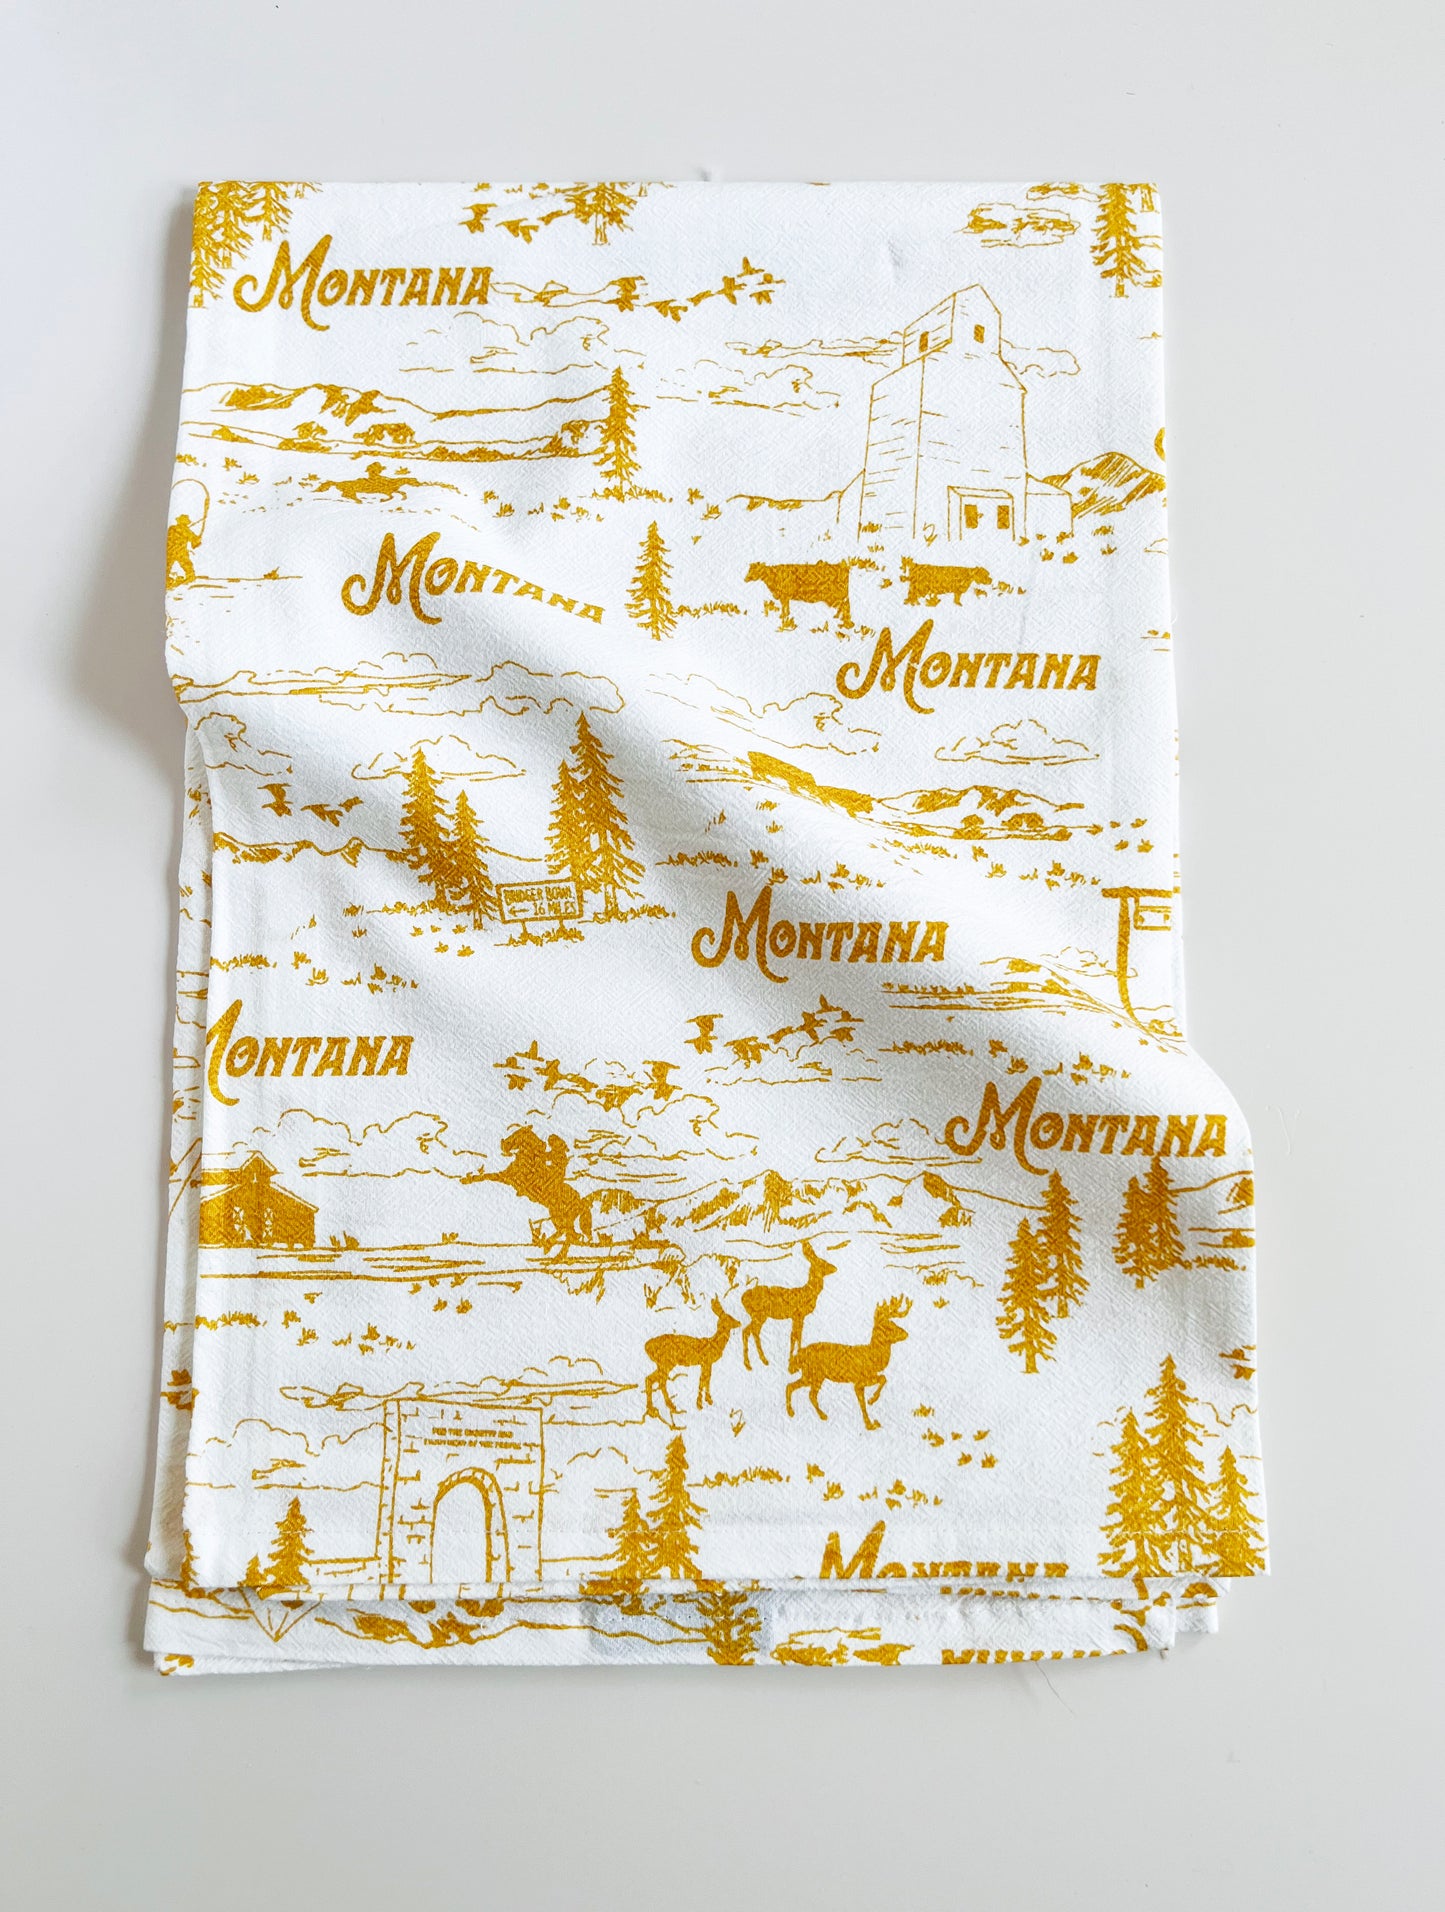 montana theme cotton kitchen towel dish towel with scenes from montana pine trees bison elk mountains yellowstone national park glacier ranch grain elevator yellow ochre screen print on white towel coin laundry montana fun travel gift